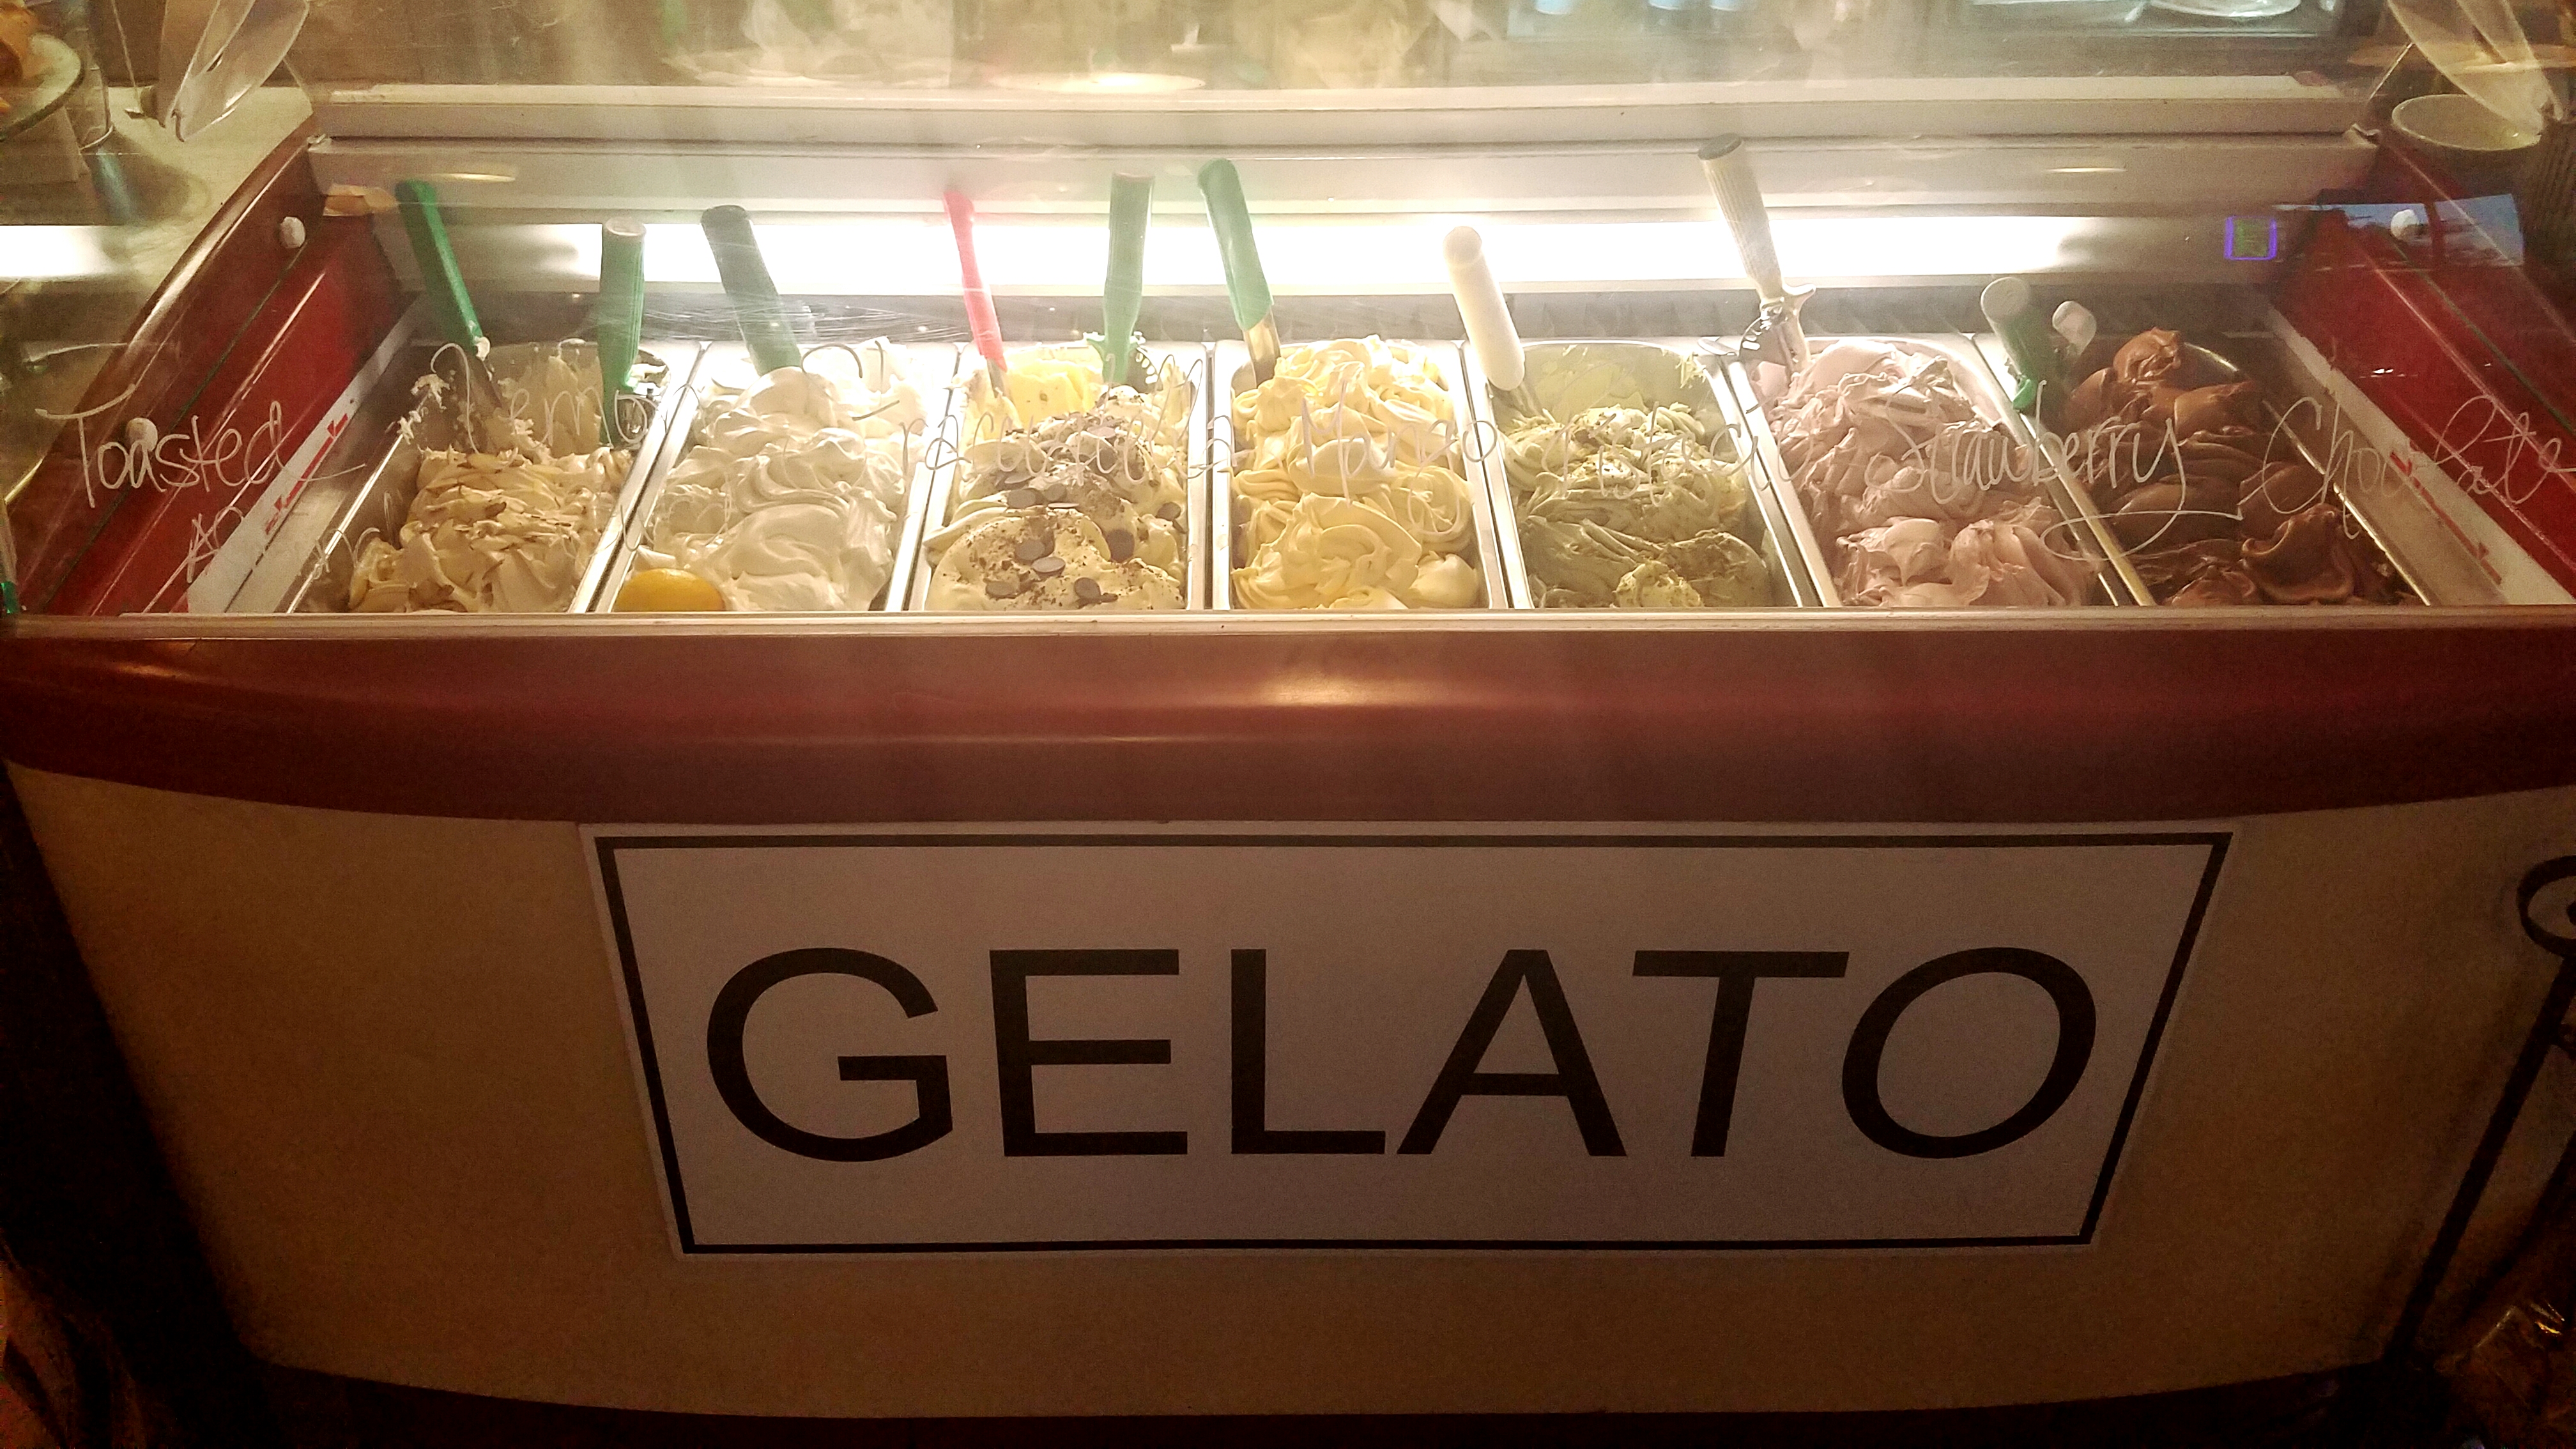 GELATO IS BACK AT GUIDO’S